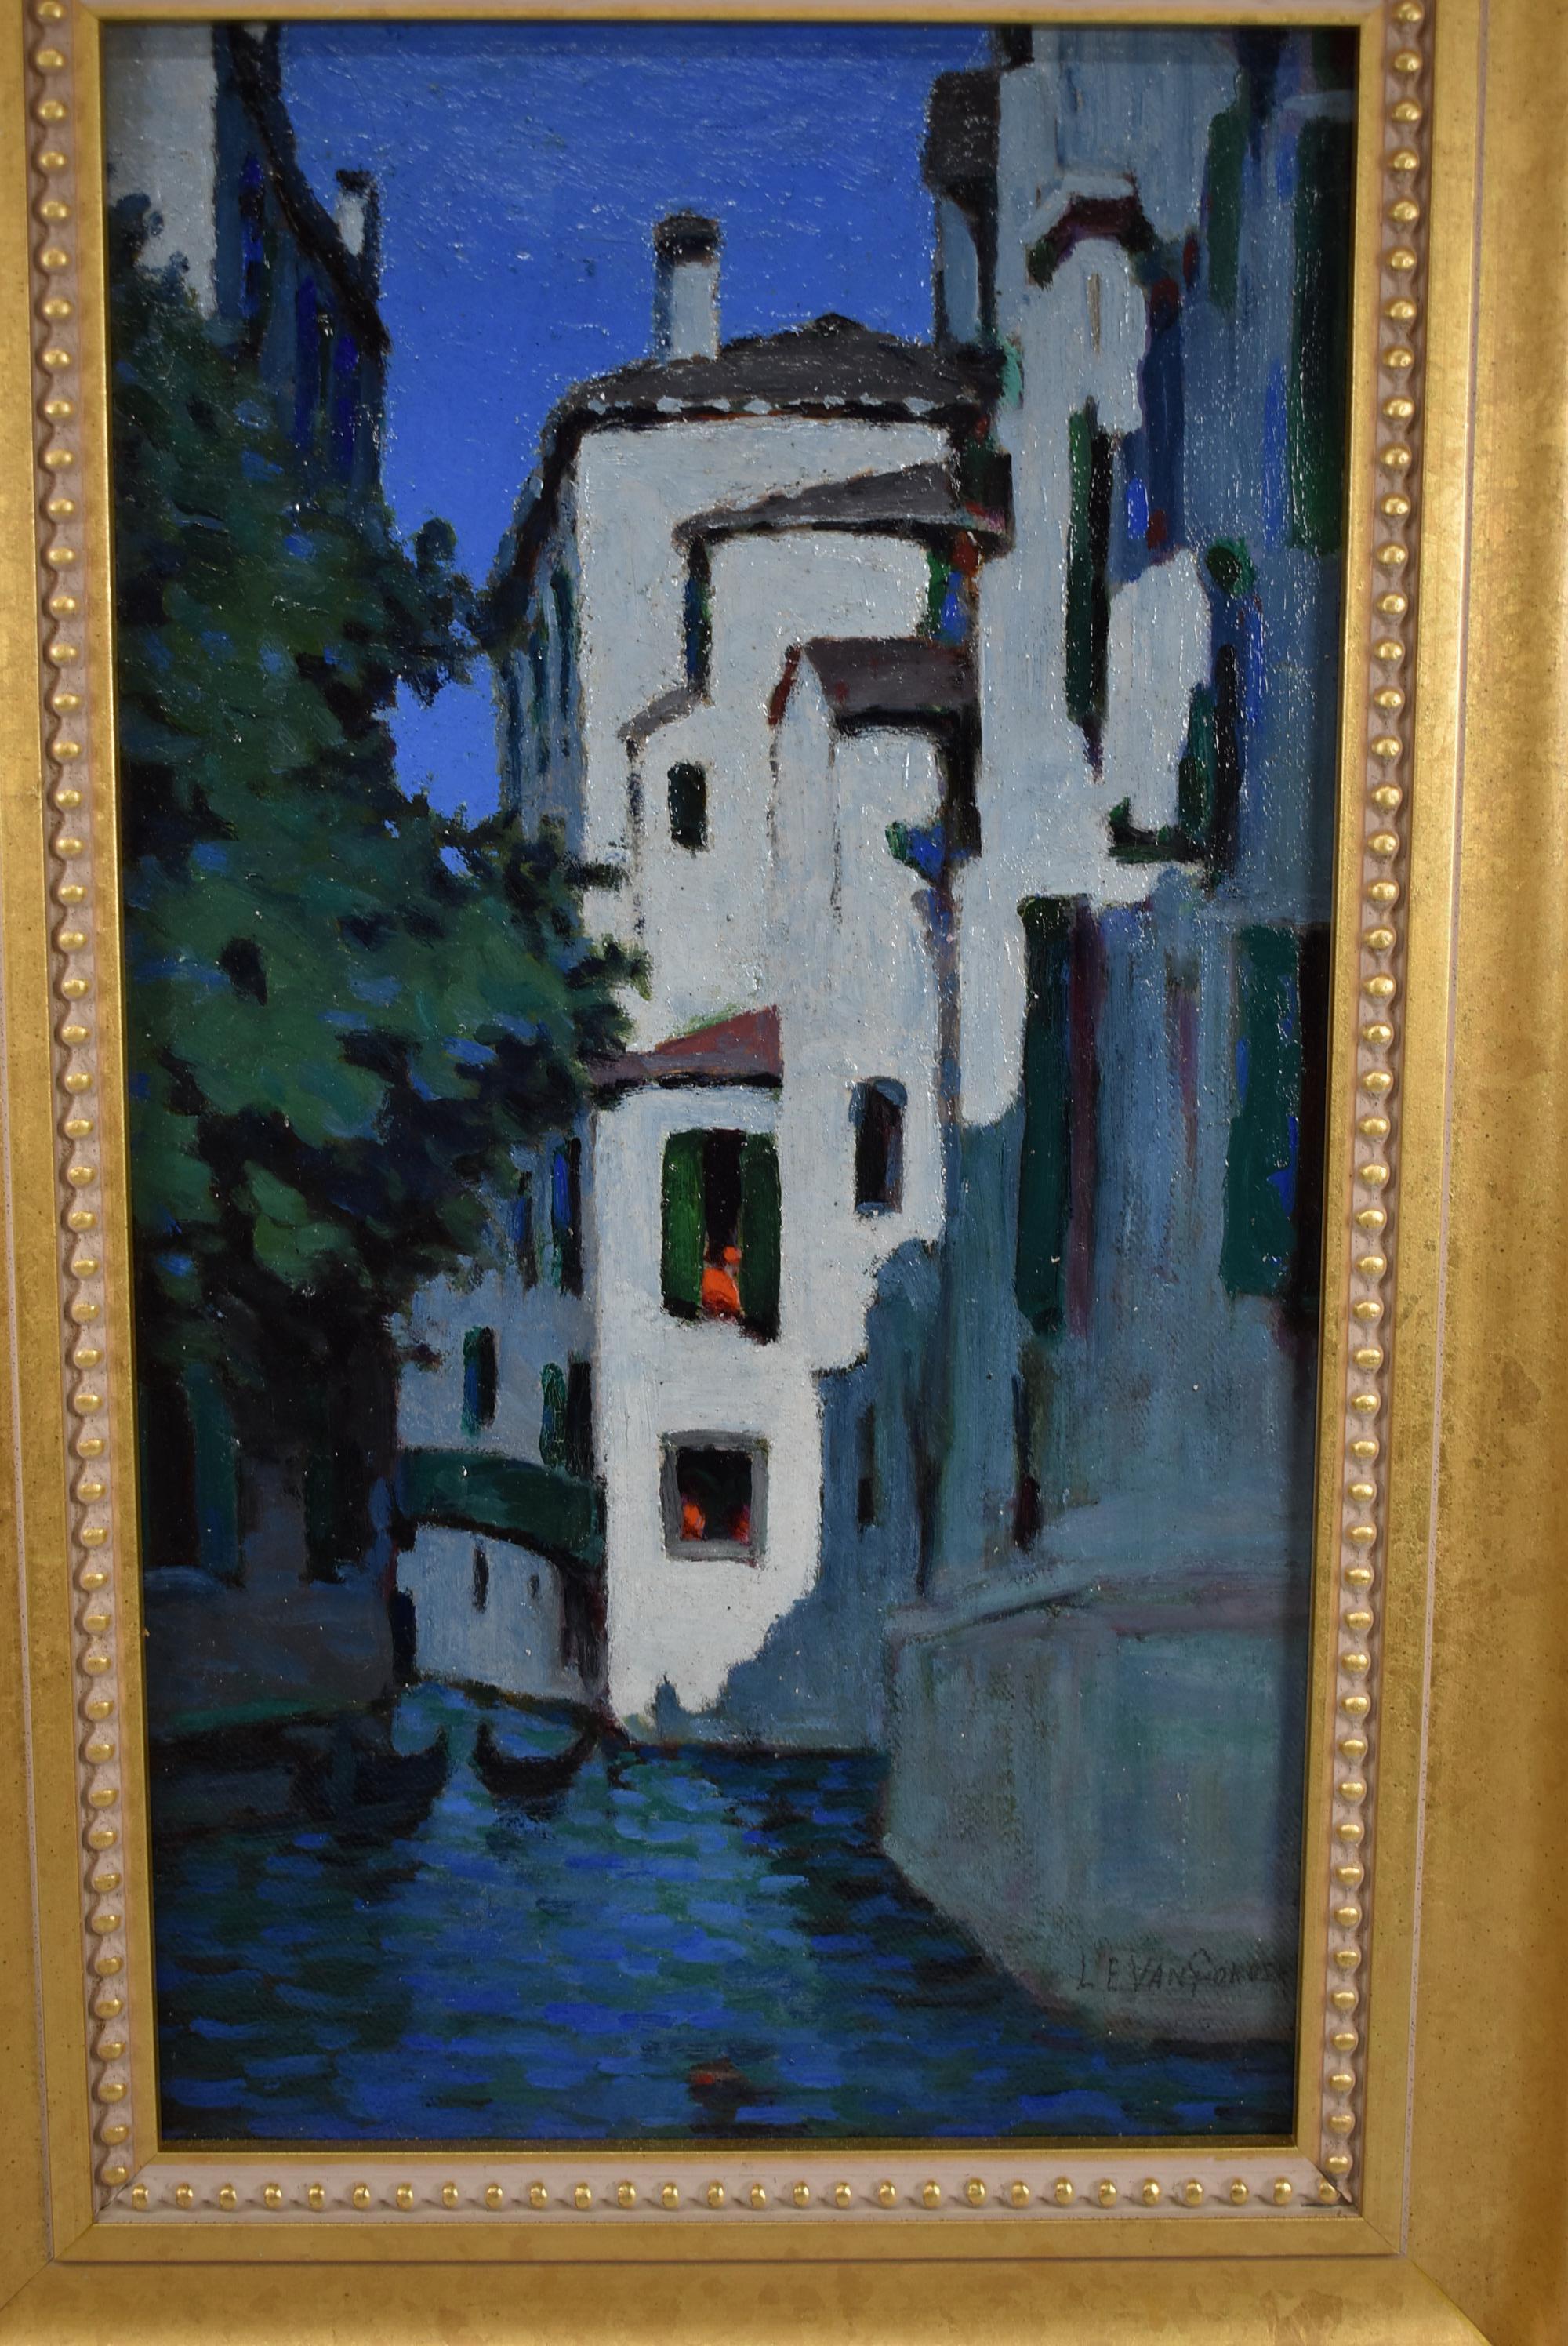 Venice canal scene at dusk oil painting on artist board by Luther Van Gorder. Signed lower right L E Van Gorder. Very good condition. Dimensions: 1.25